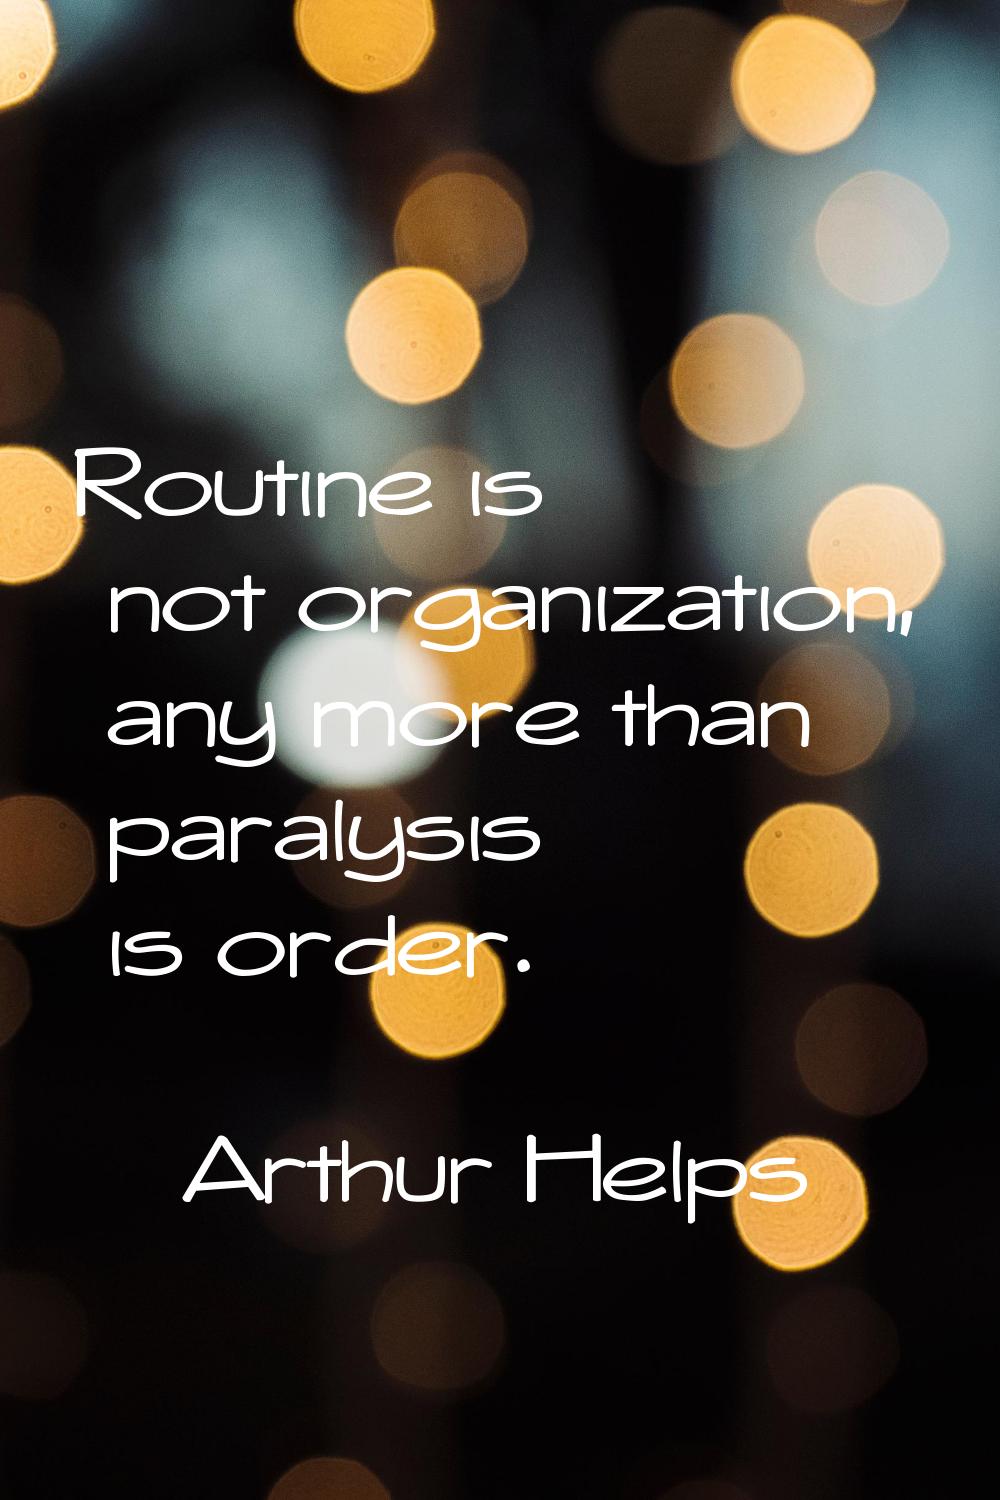 Routine is not organization, any more than paralysis is order.